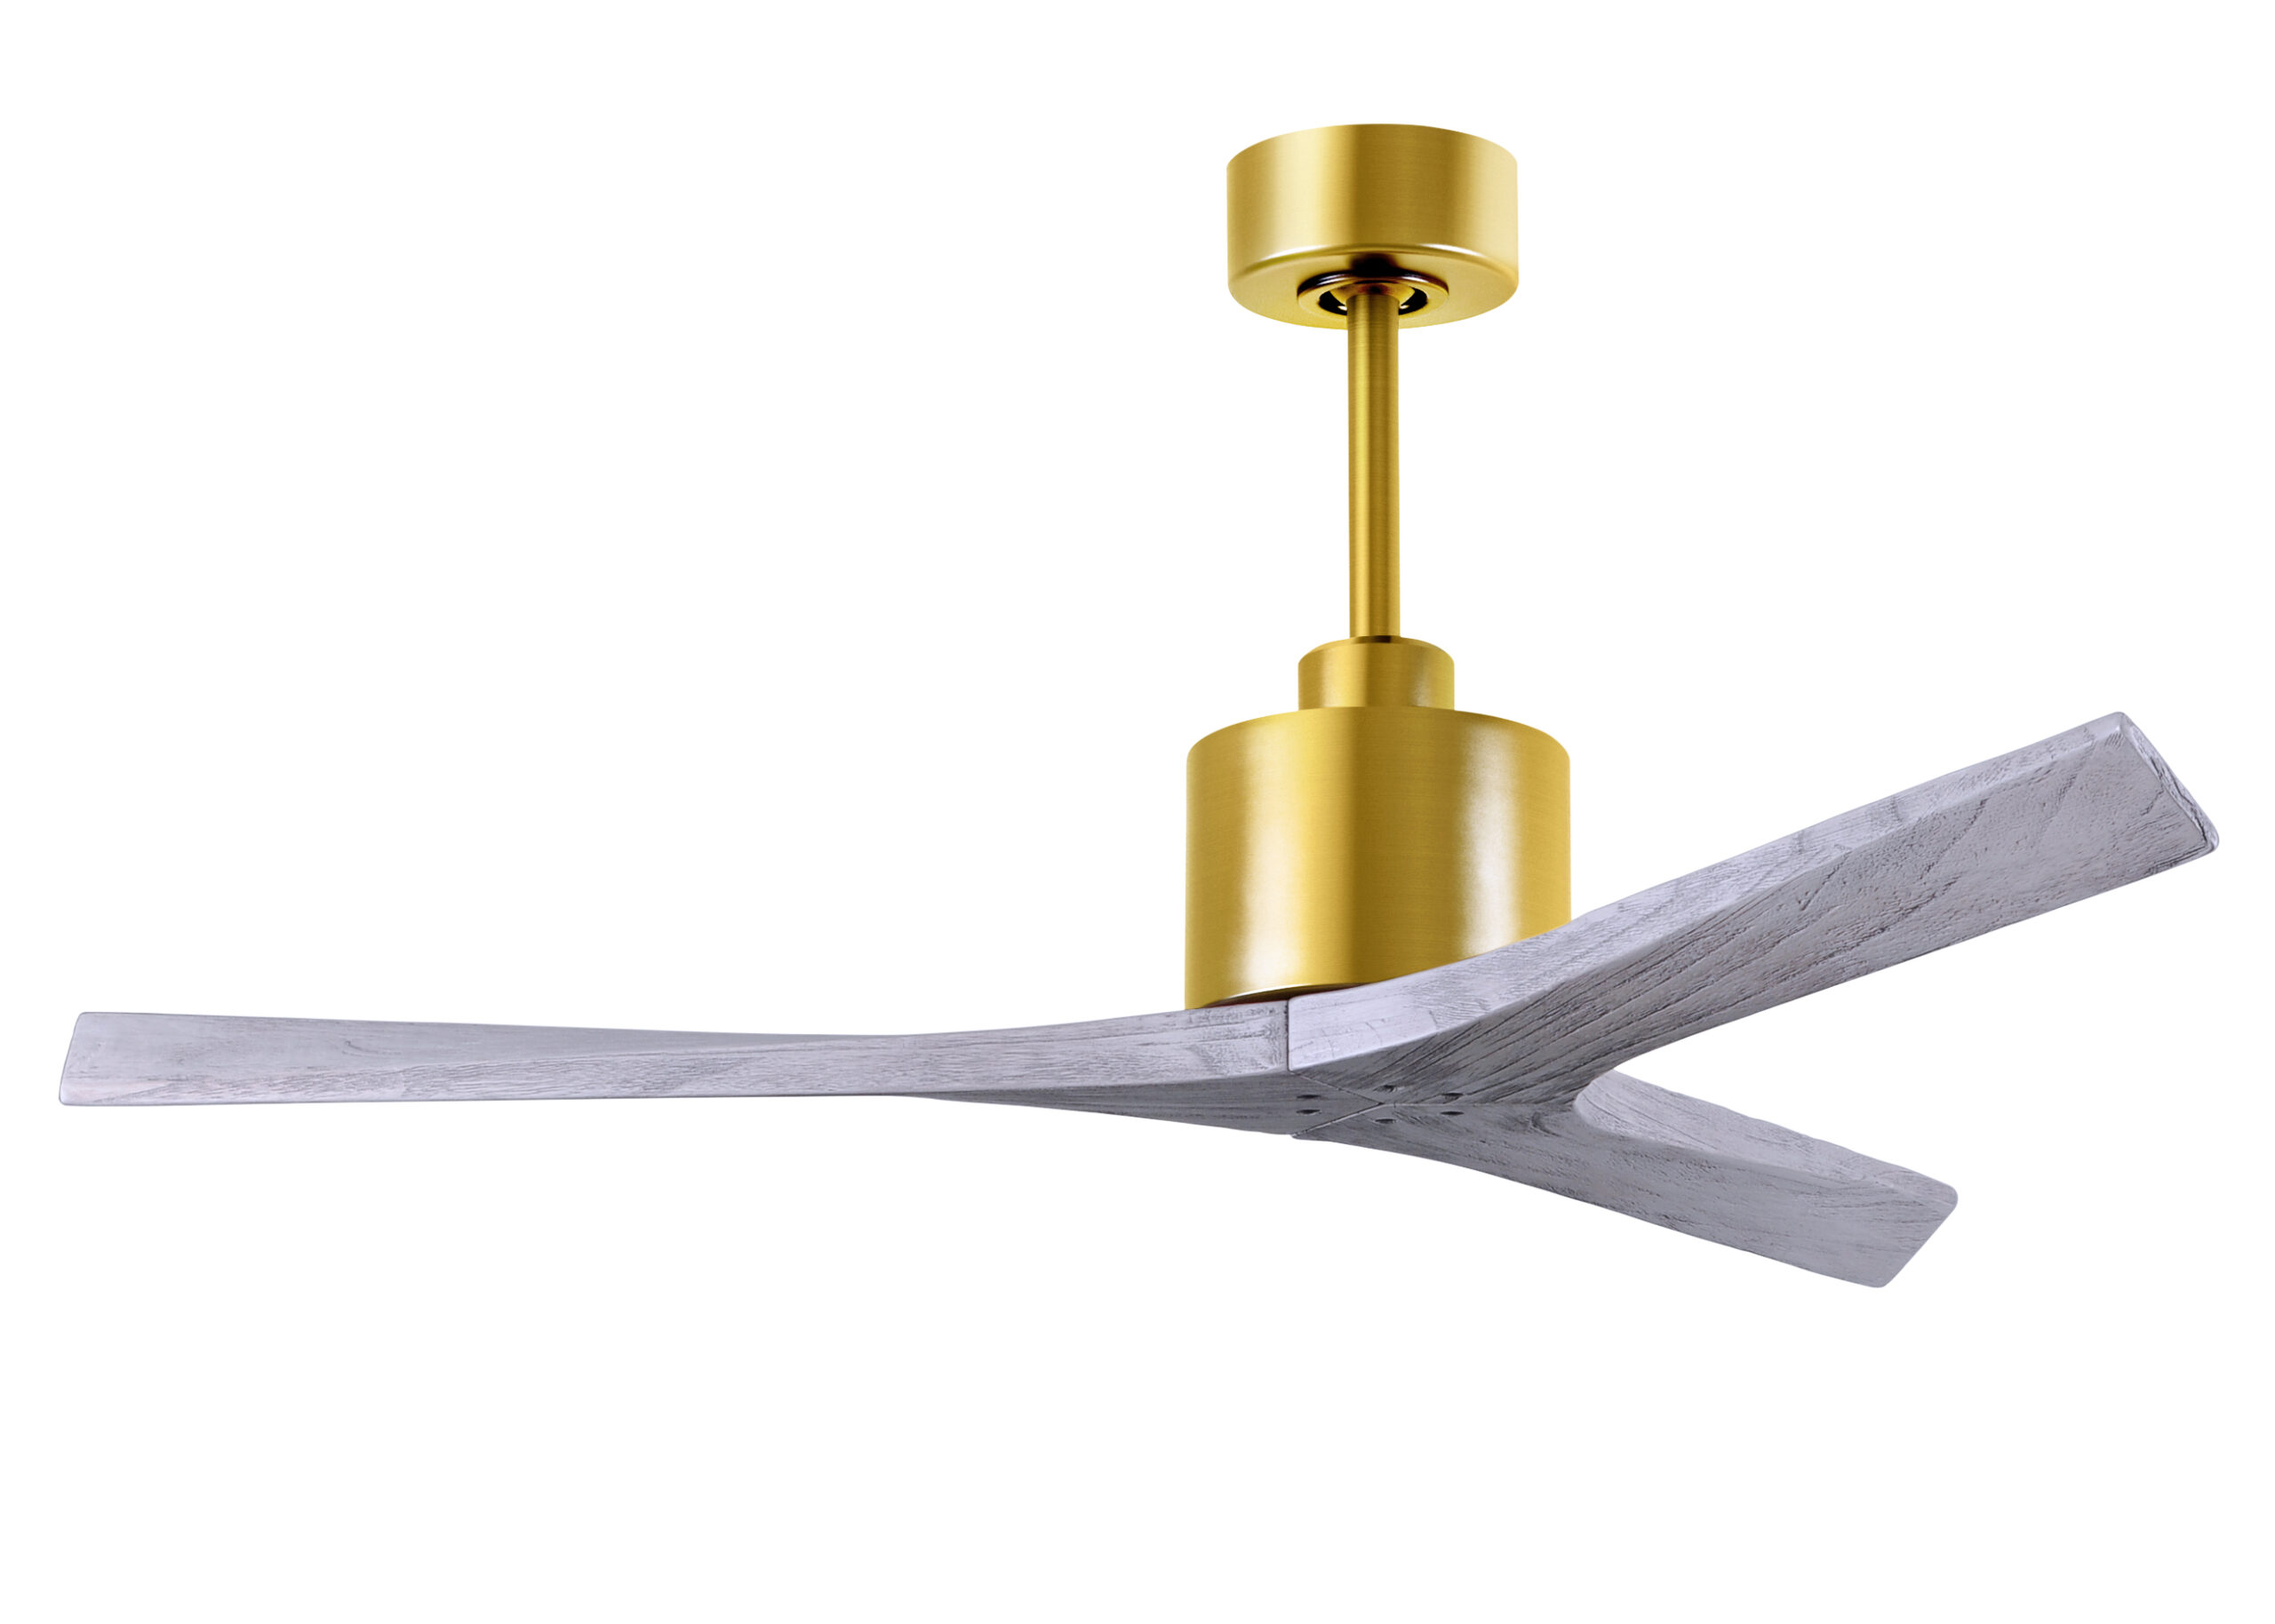 Mollywood Ceiling Fan in Brushed Brass with 52” Barn Wood Blades